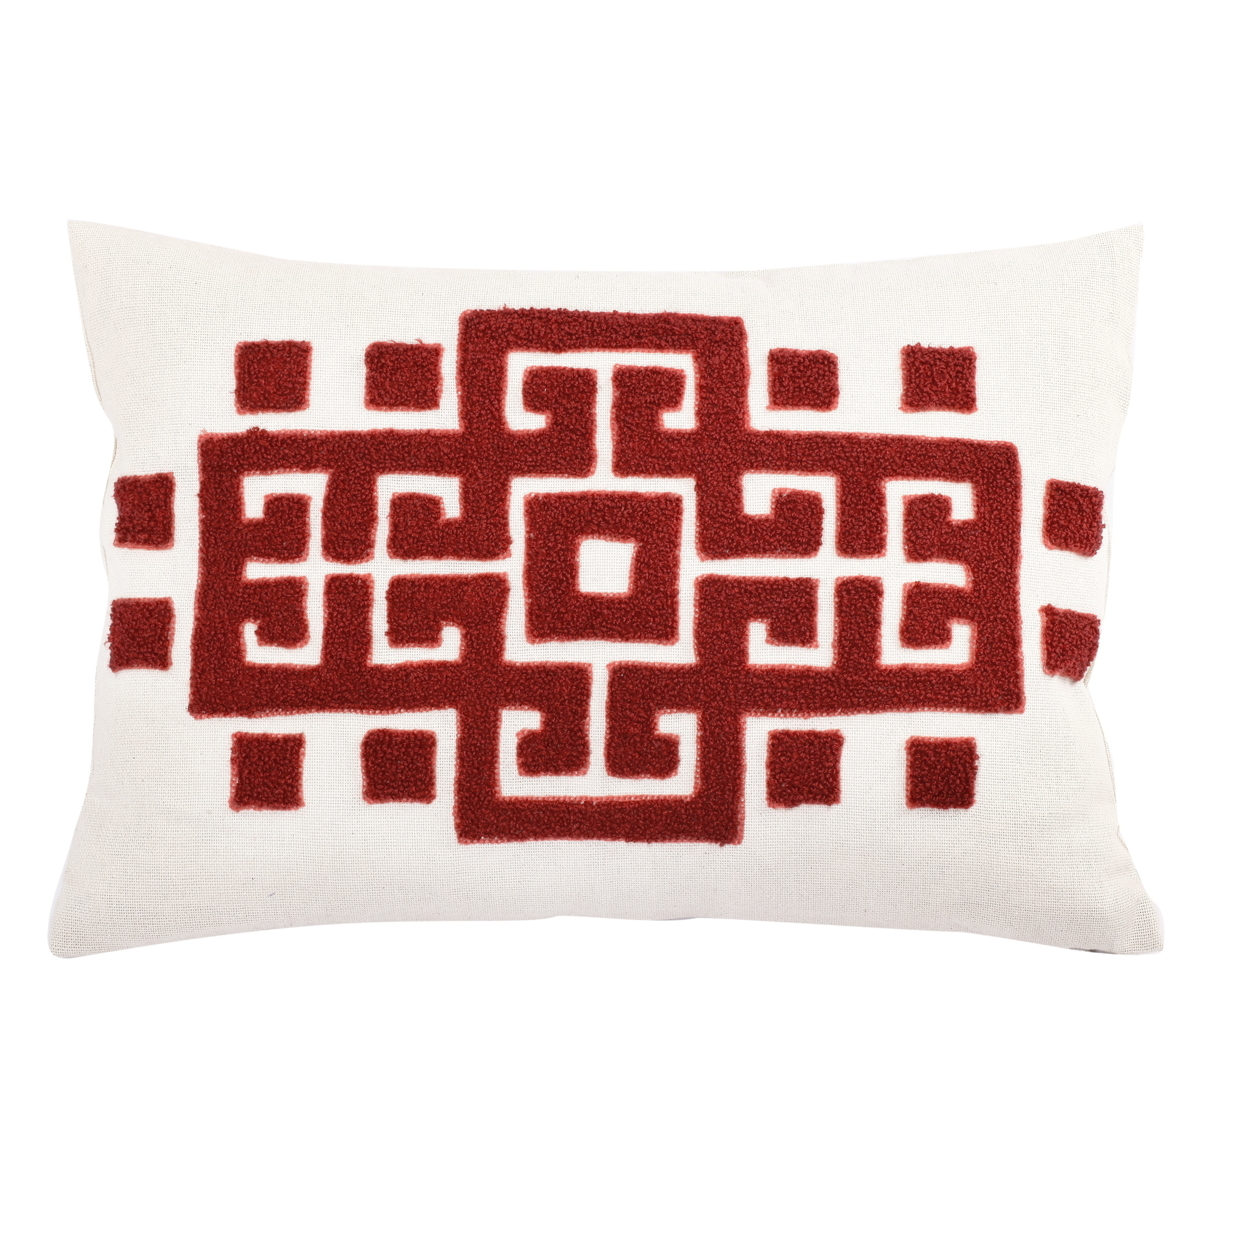 20 X 14 Inch Bergamo Embroidered Feather Filled Pillow, Set Of 2, White And Red- Saltoro Sherpi